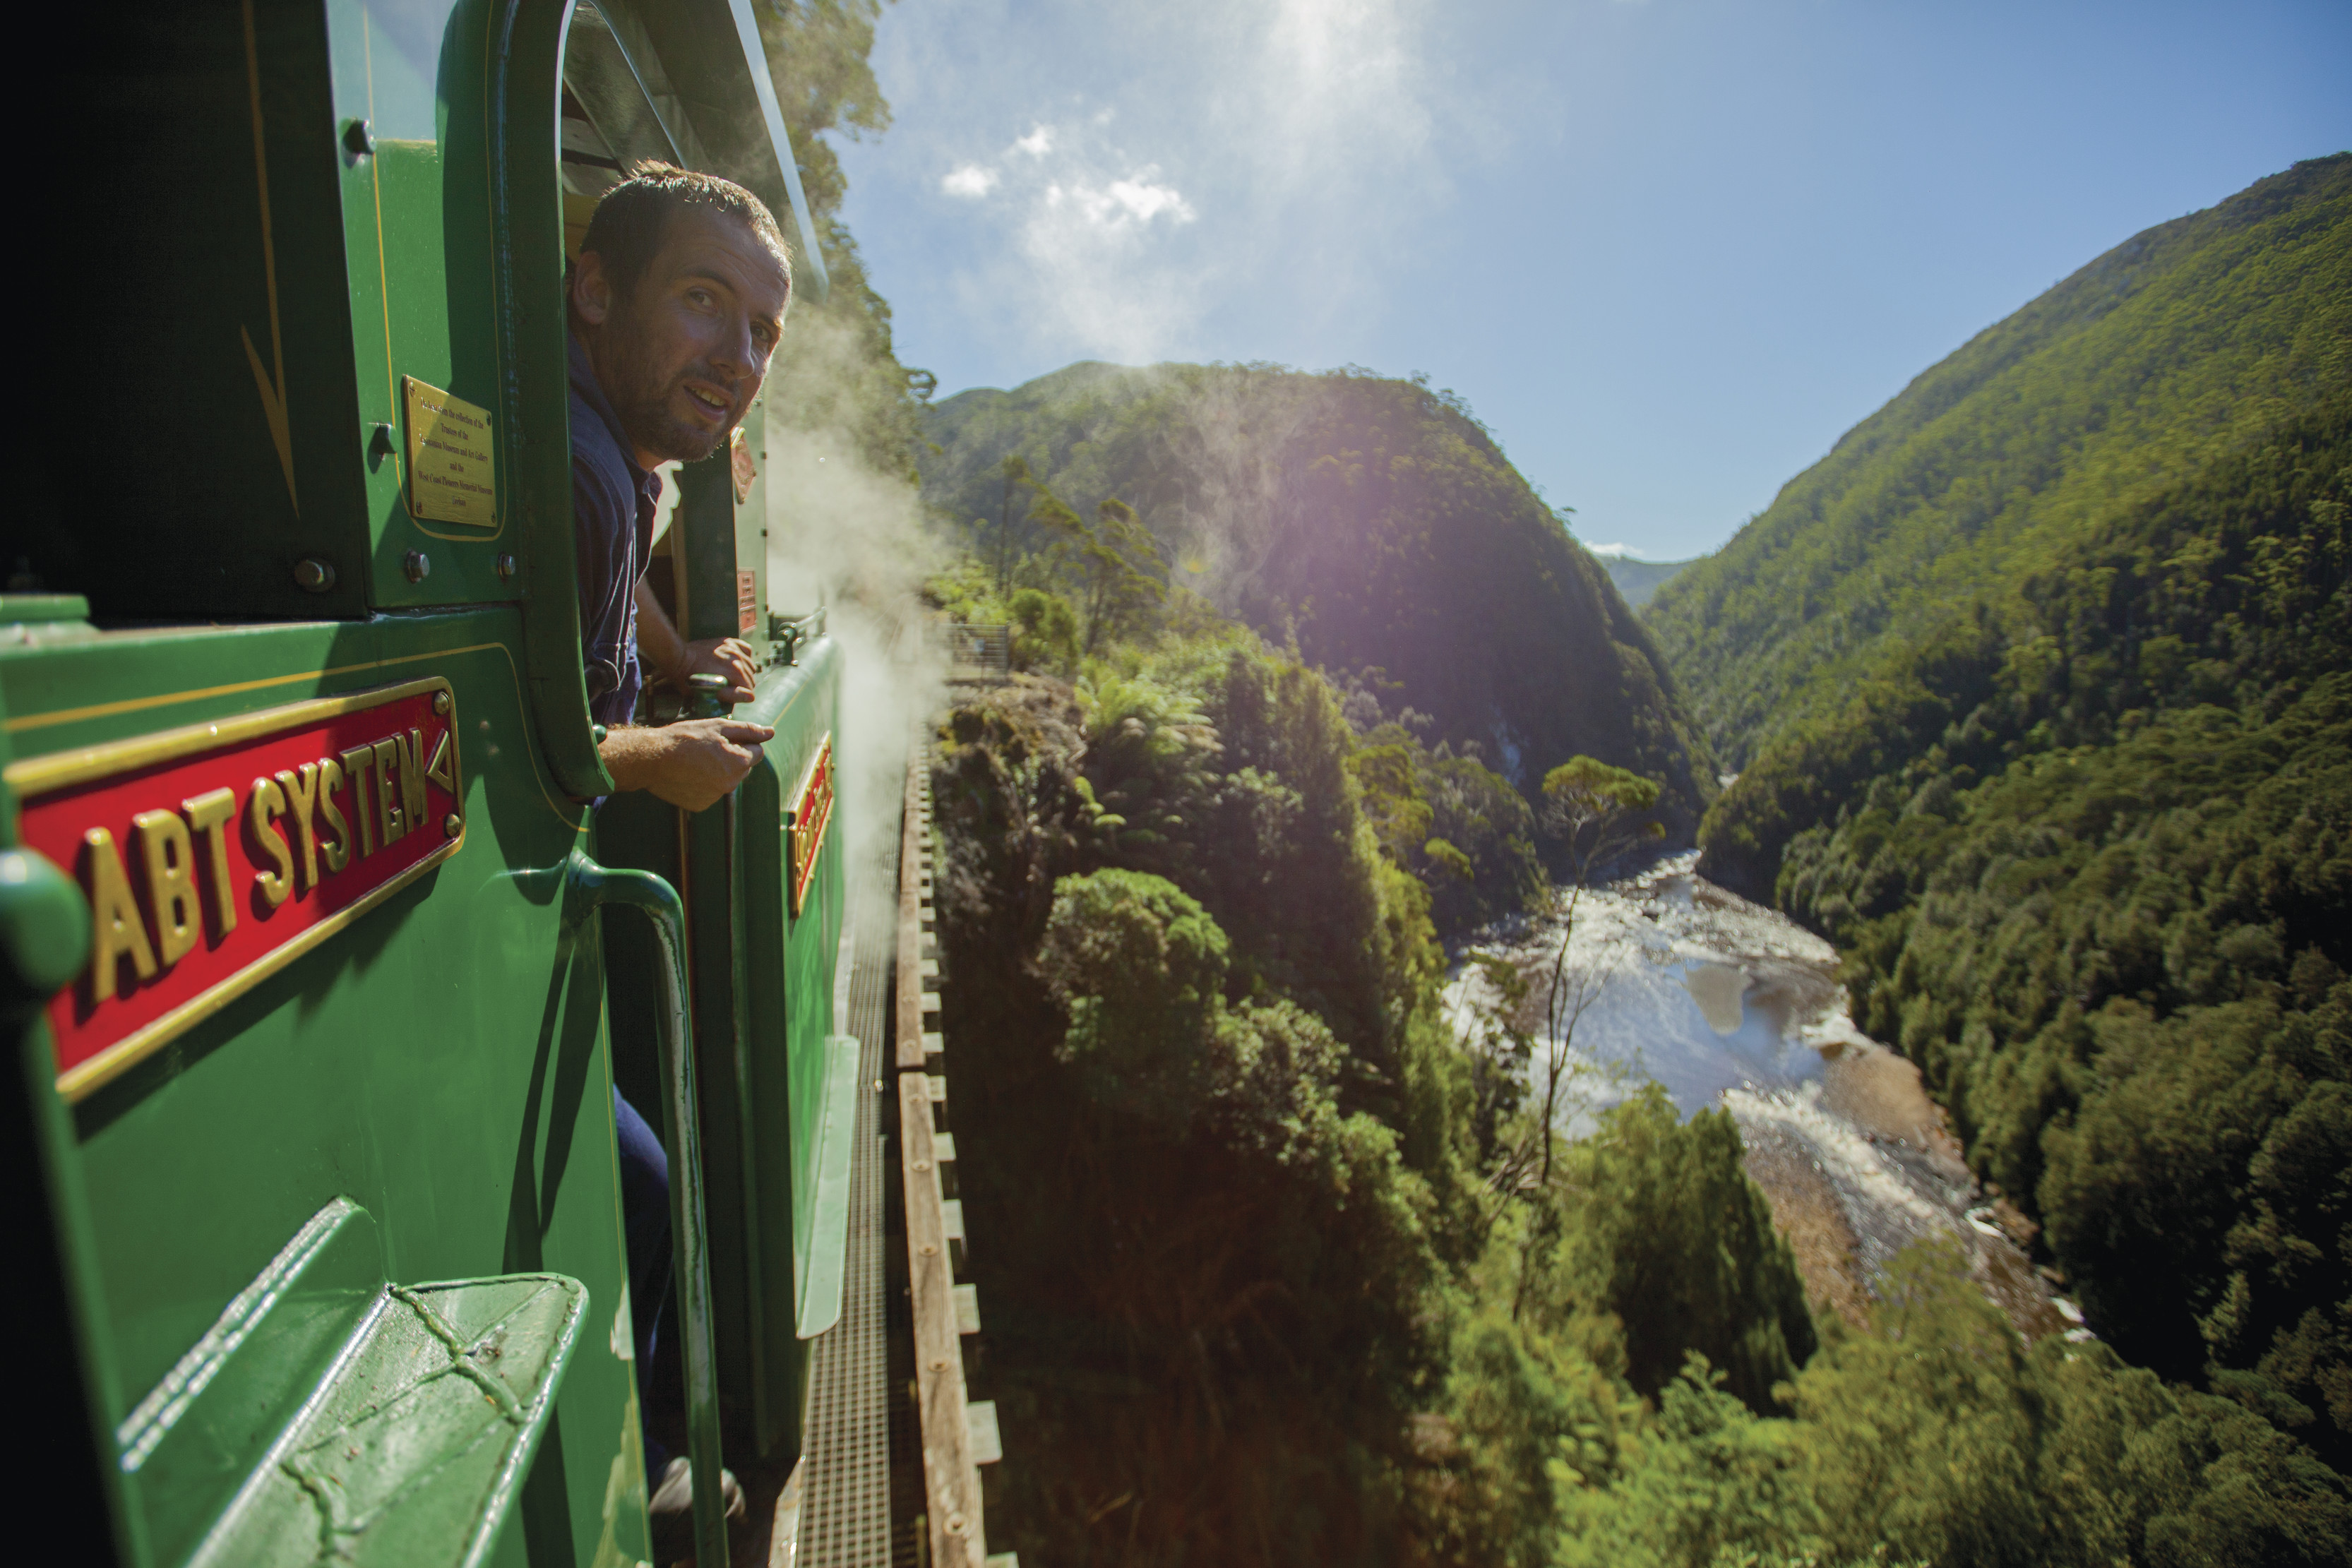 "Person sticking their head out of the train, back towards the camera, surrounded by lush green forest and water, with West Coast Wilderness Railway. "